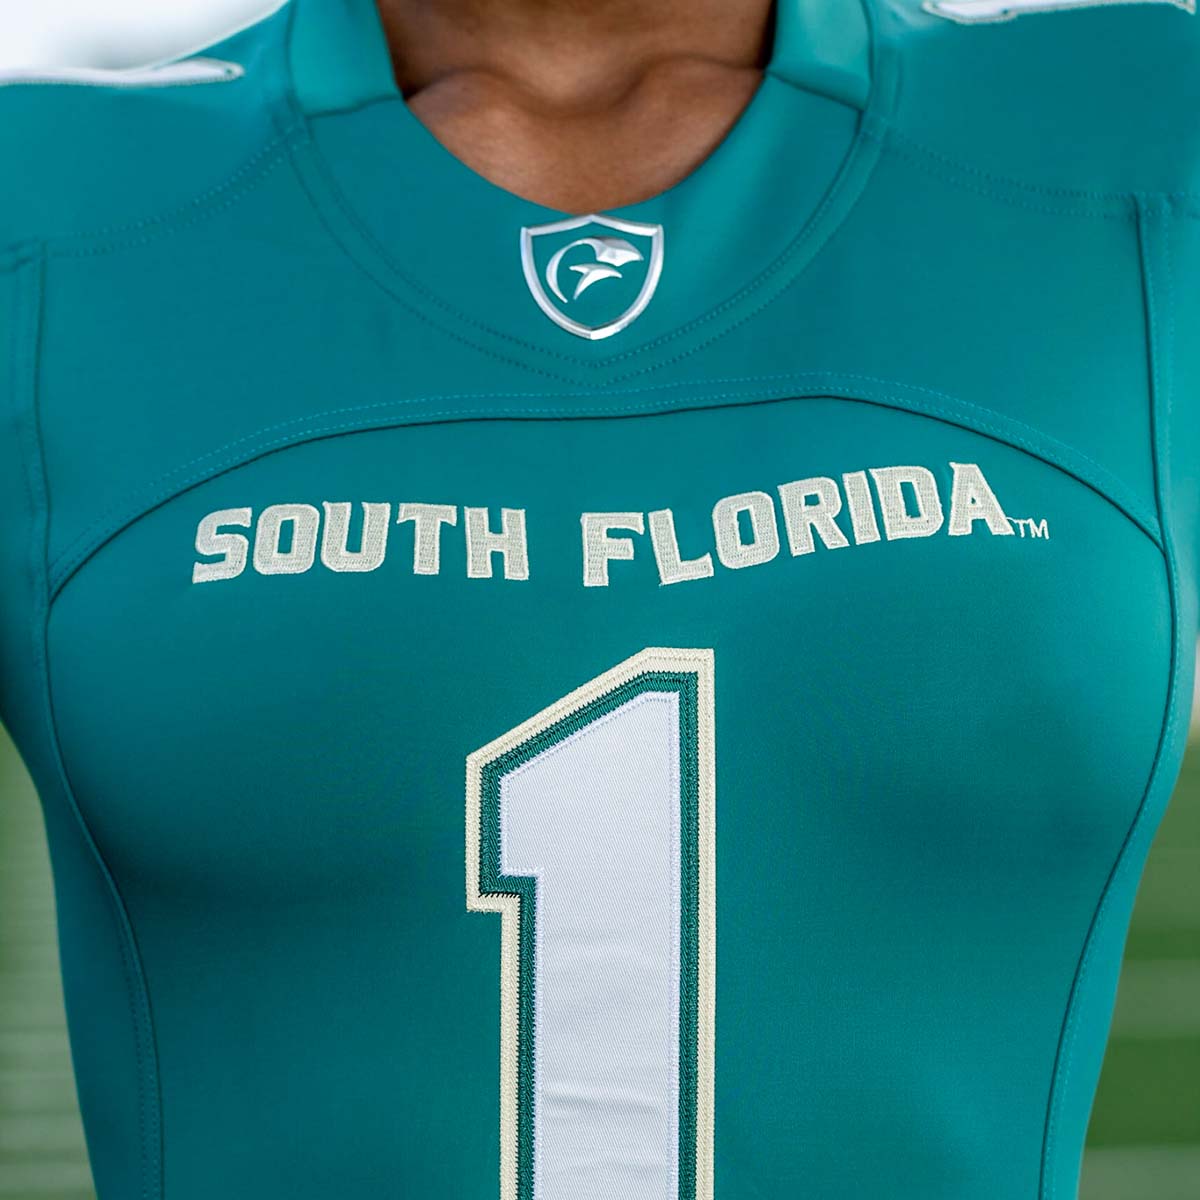 SOUTH FLORIDA AUTHENTIC JERSEY DRESS-X-Small